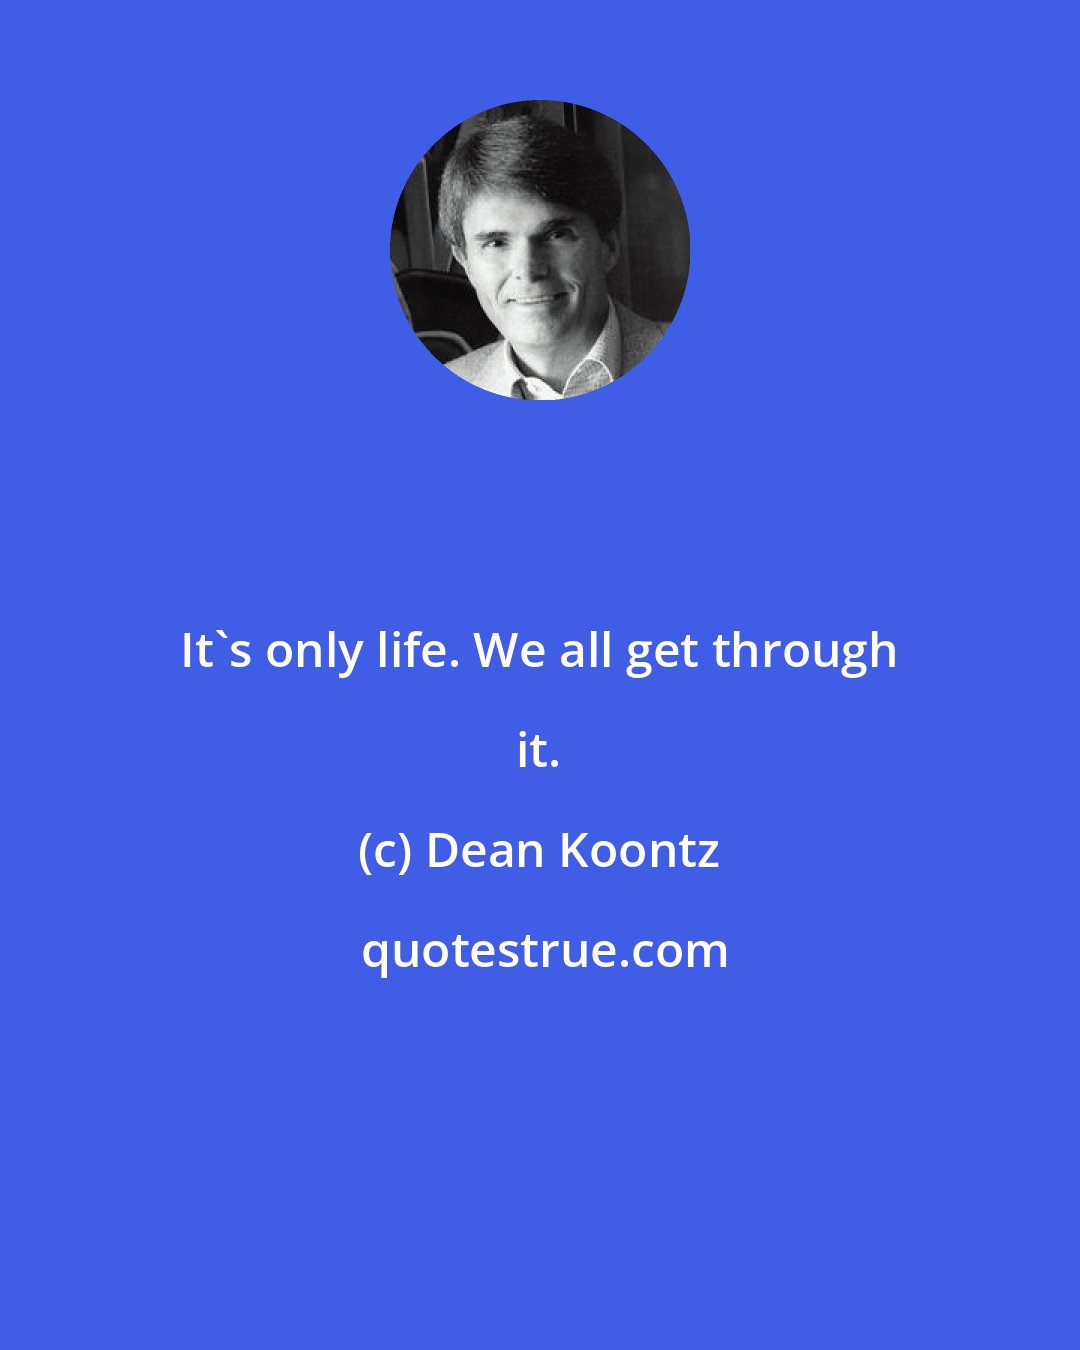 Dean Koontz: It's only life. We all get through it.